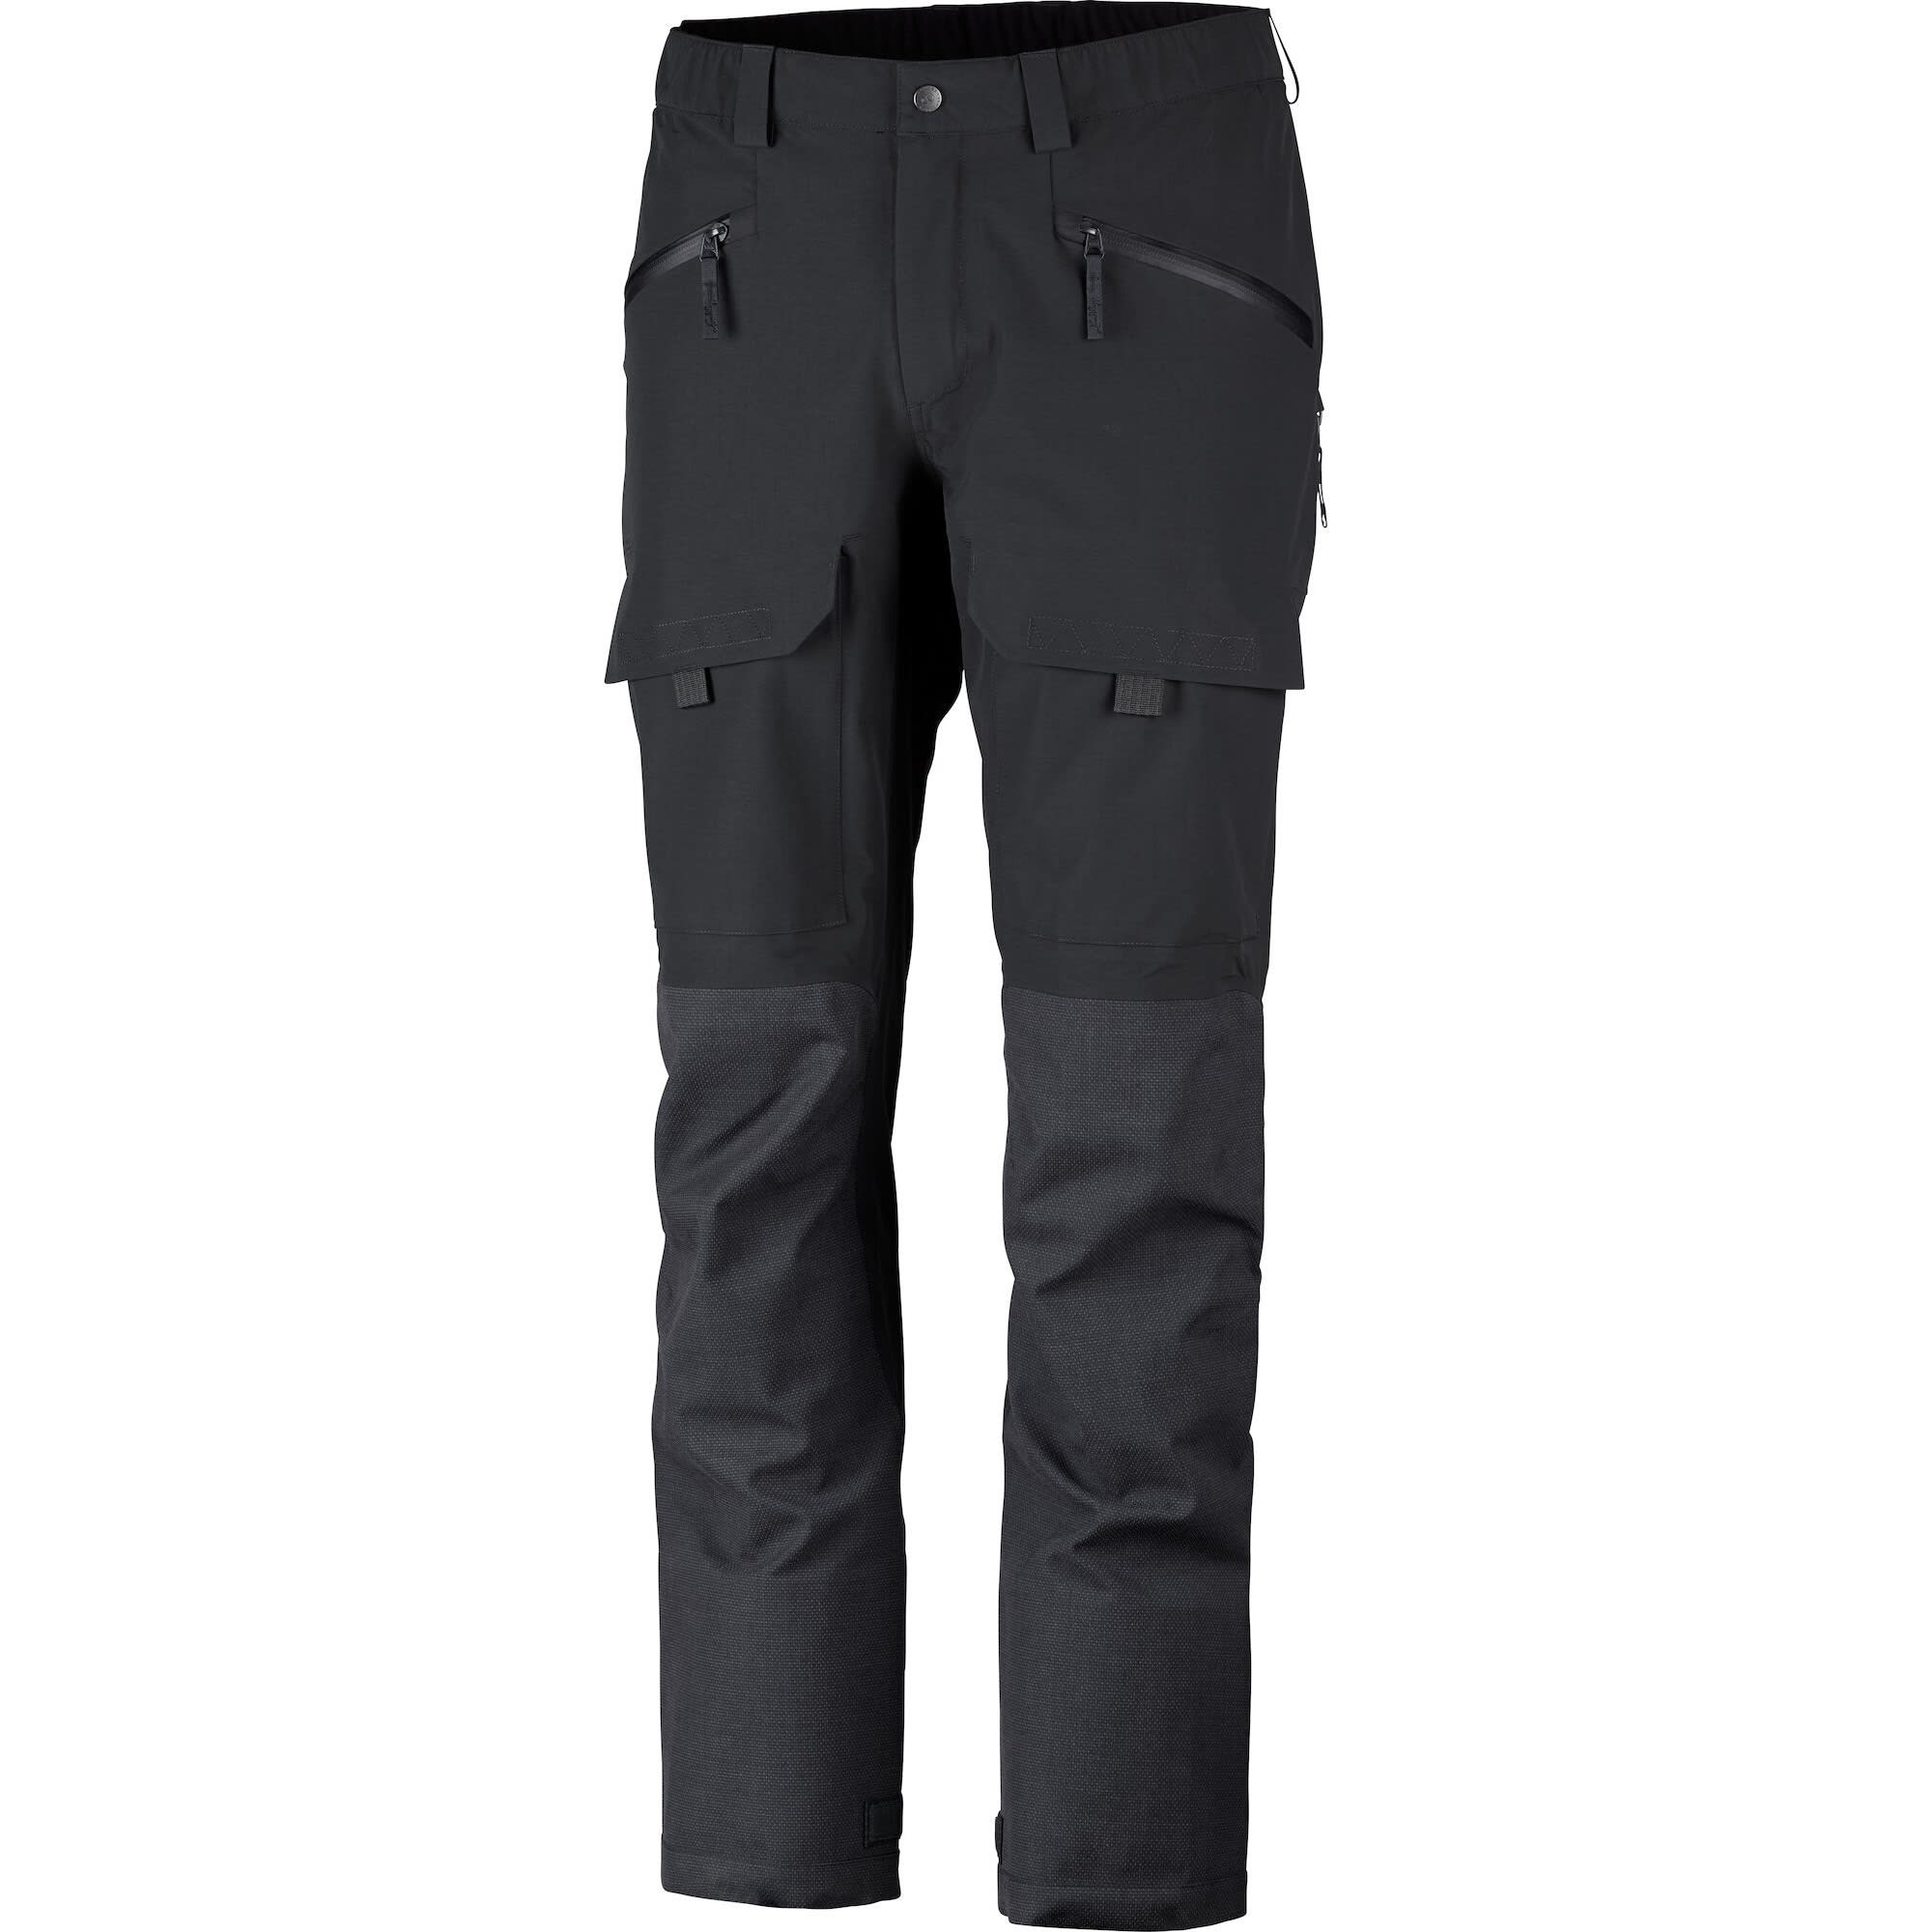 Buy Lundhags Ocke Men's Pant from Outnorth